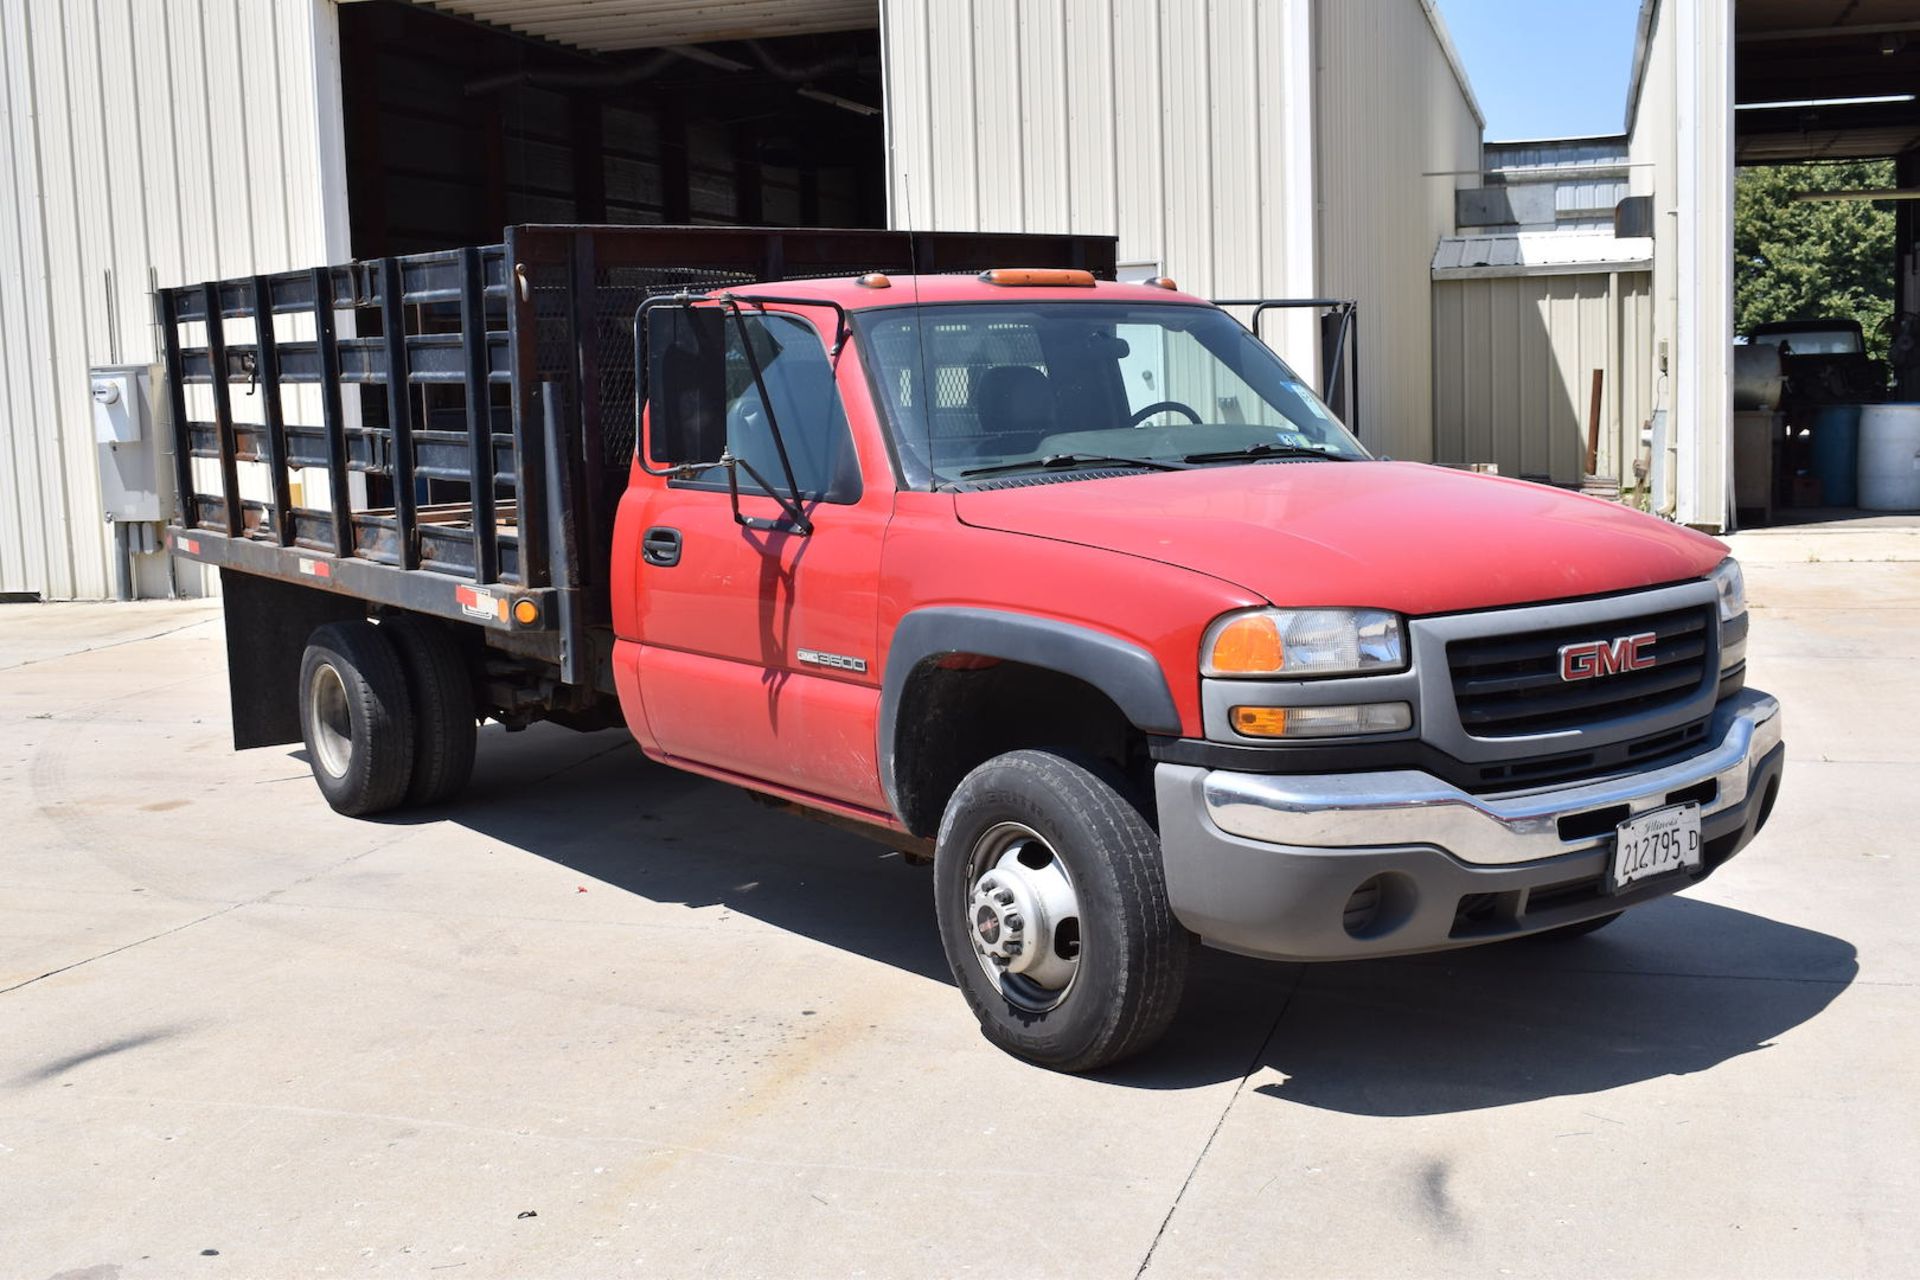 2005 GMC 3500 Single-Axle Stake Bed Truck, VIN 1GDJC34UX5E344645, 12 ft. (approx.) Bed, Vortec 6. - Image 2 of 10